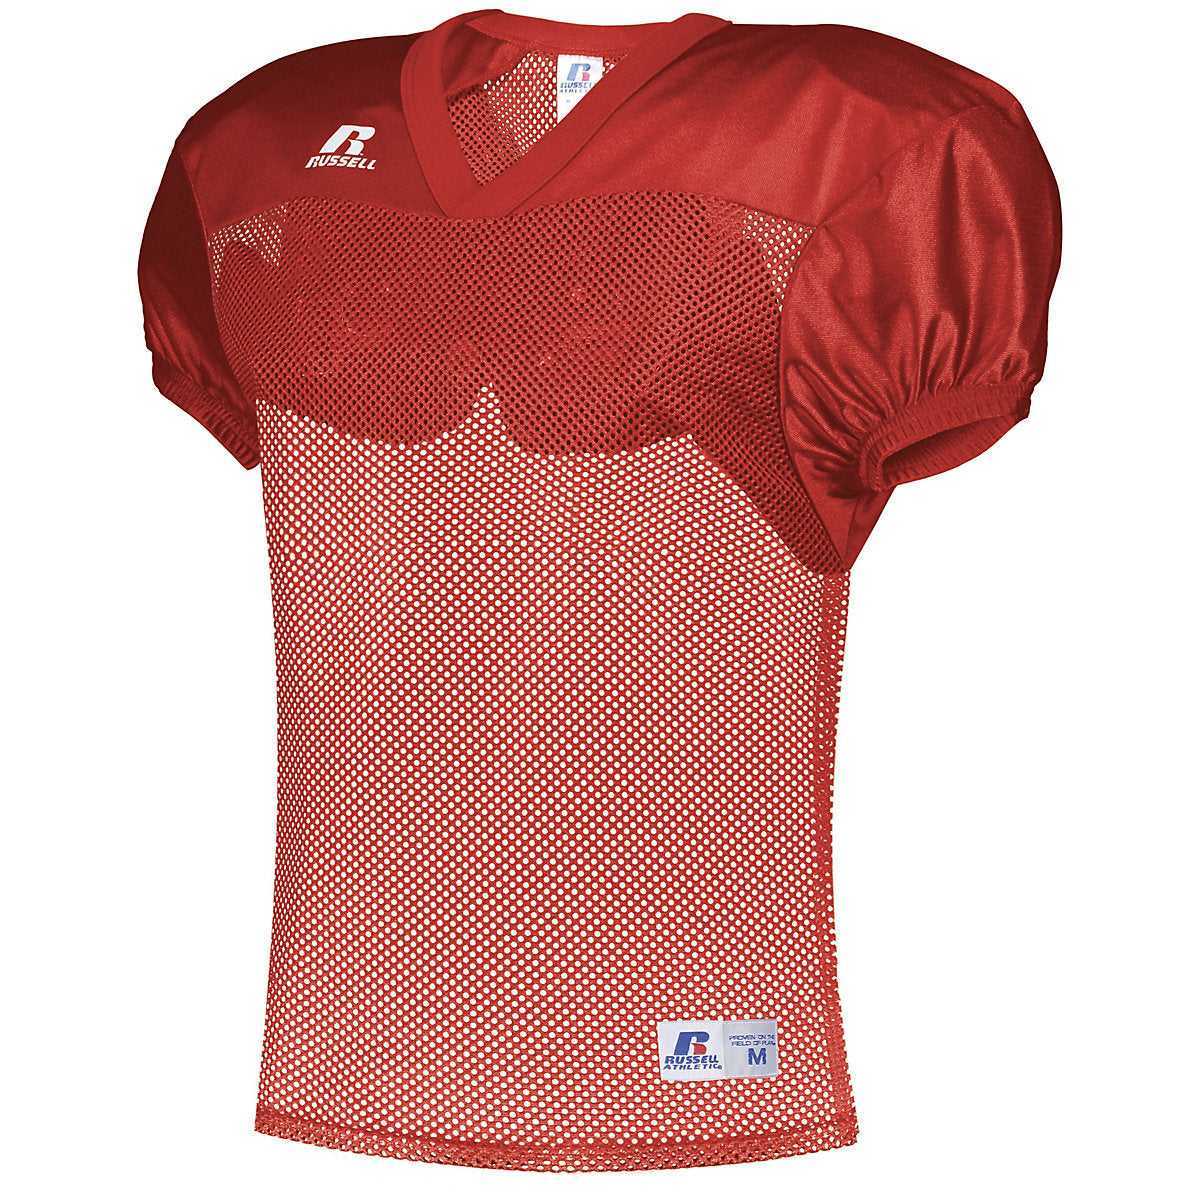 Russell S096BM Stock Practice Jersey - True Red - HIT a Double